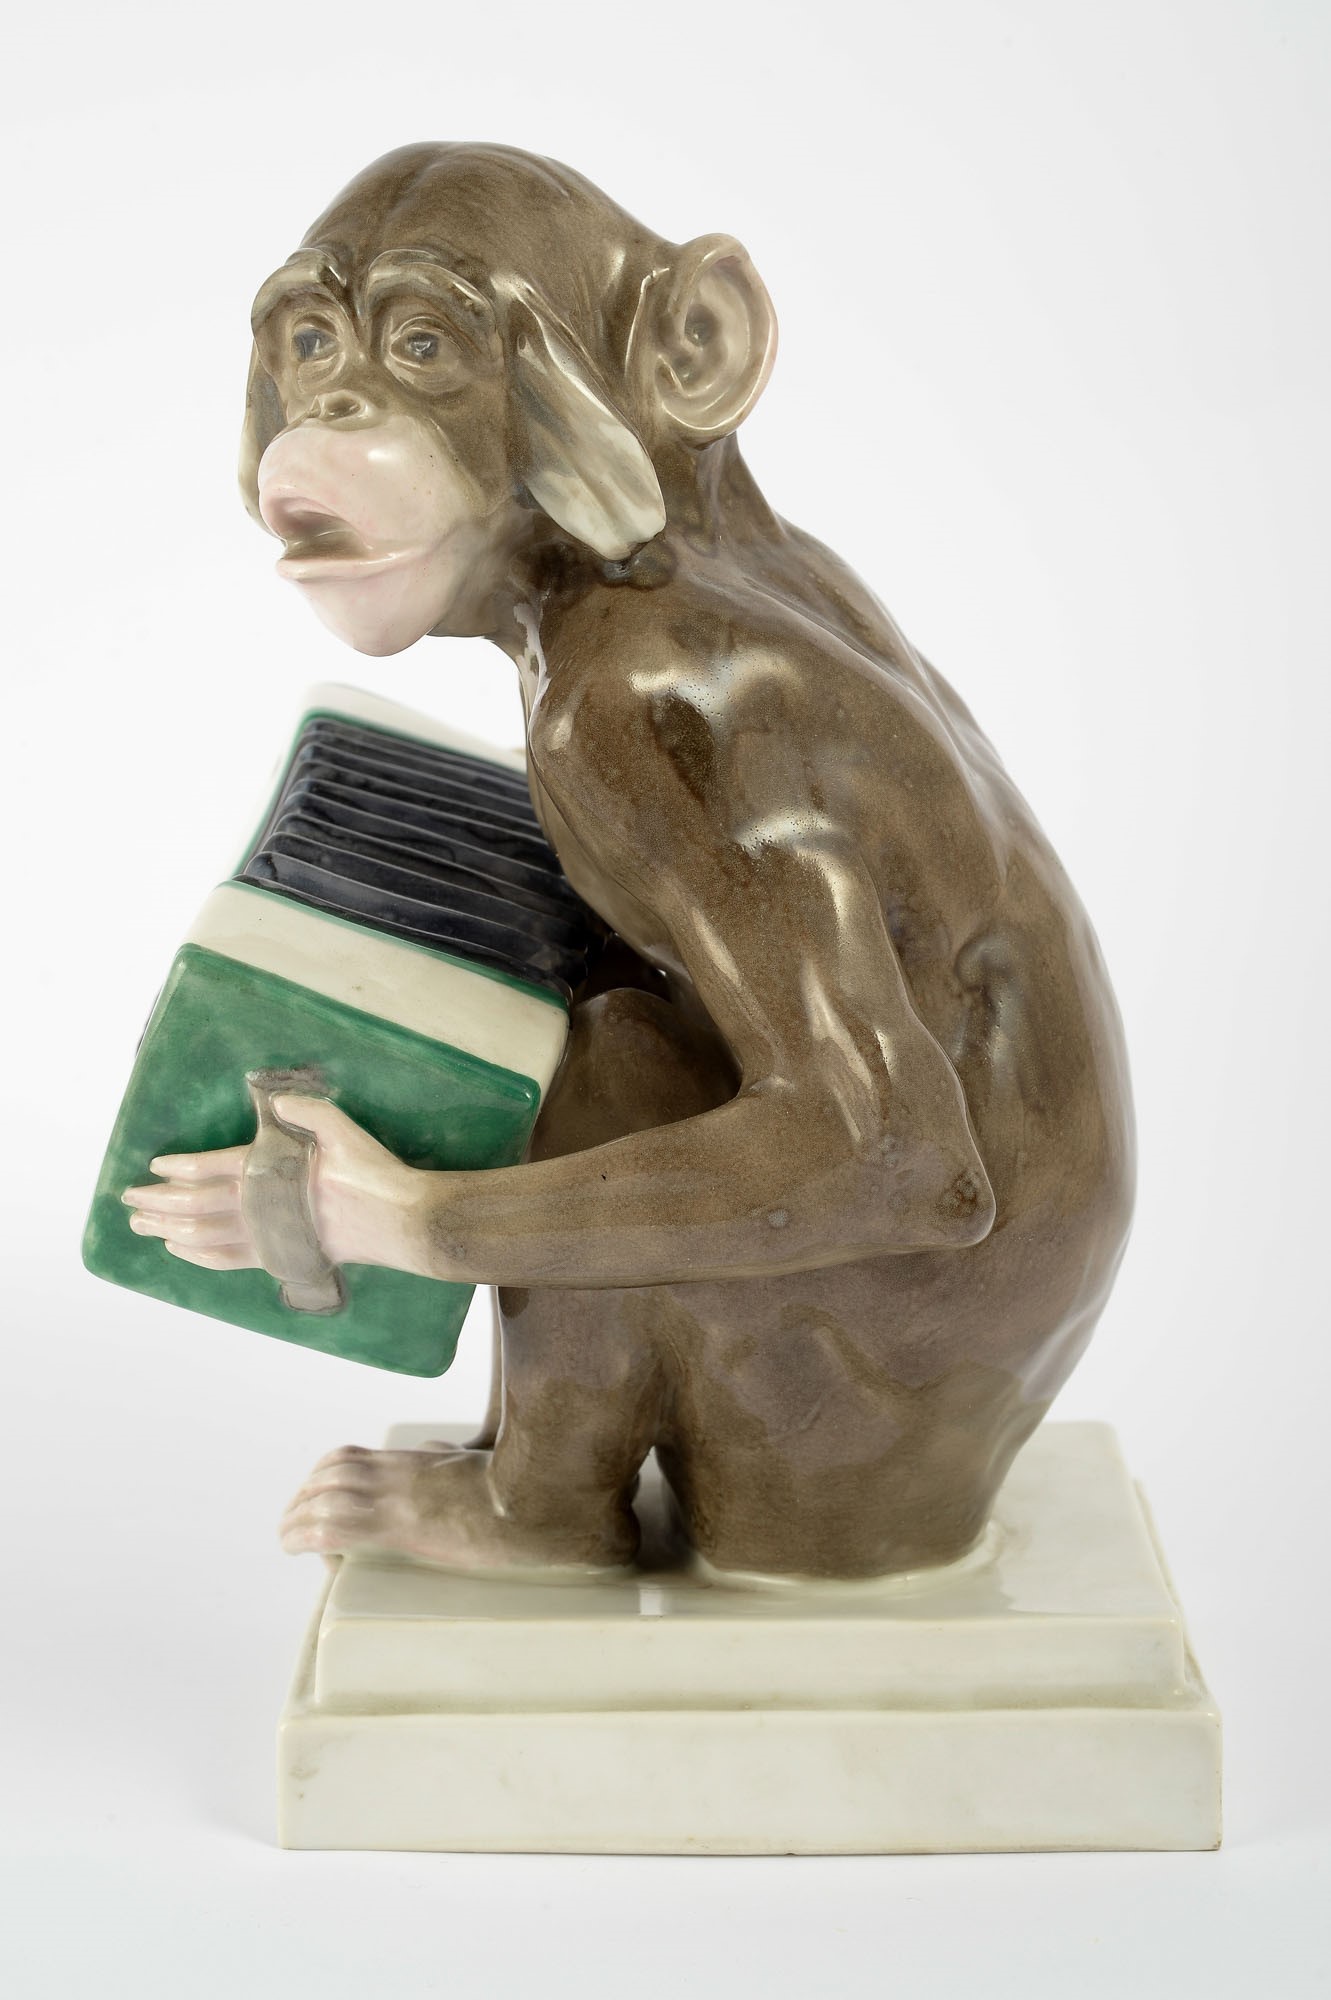 Polychrome porcelain sculpture depicting monkey playing - Image 5 of 6